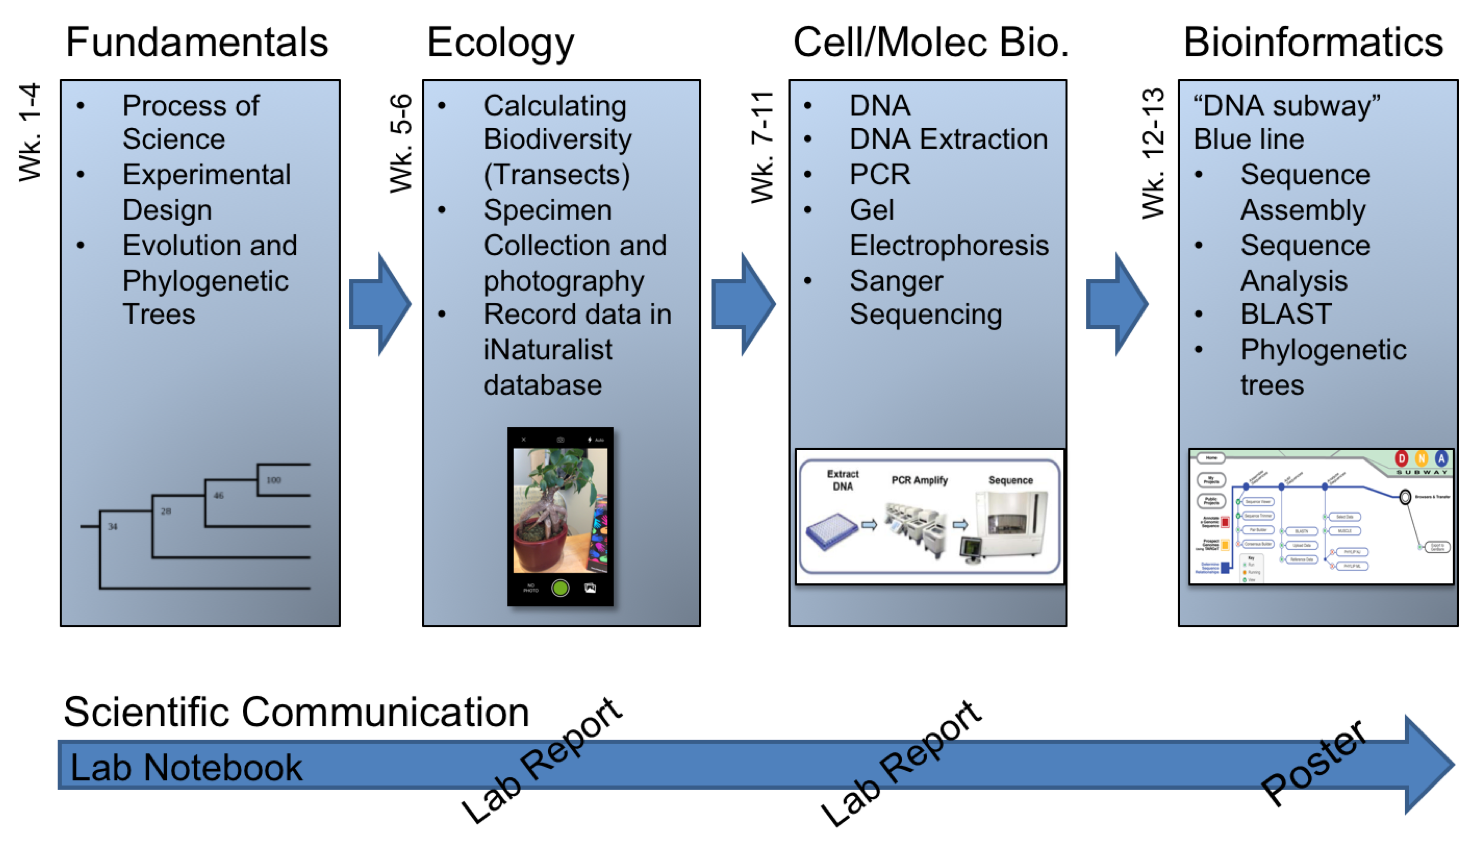 Figure 1. Overview of the topics covered during this semester-long DNA barcoding lab experience